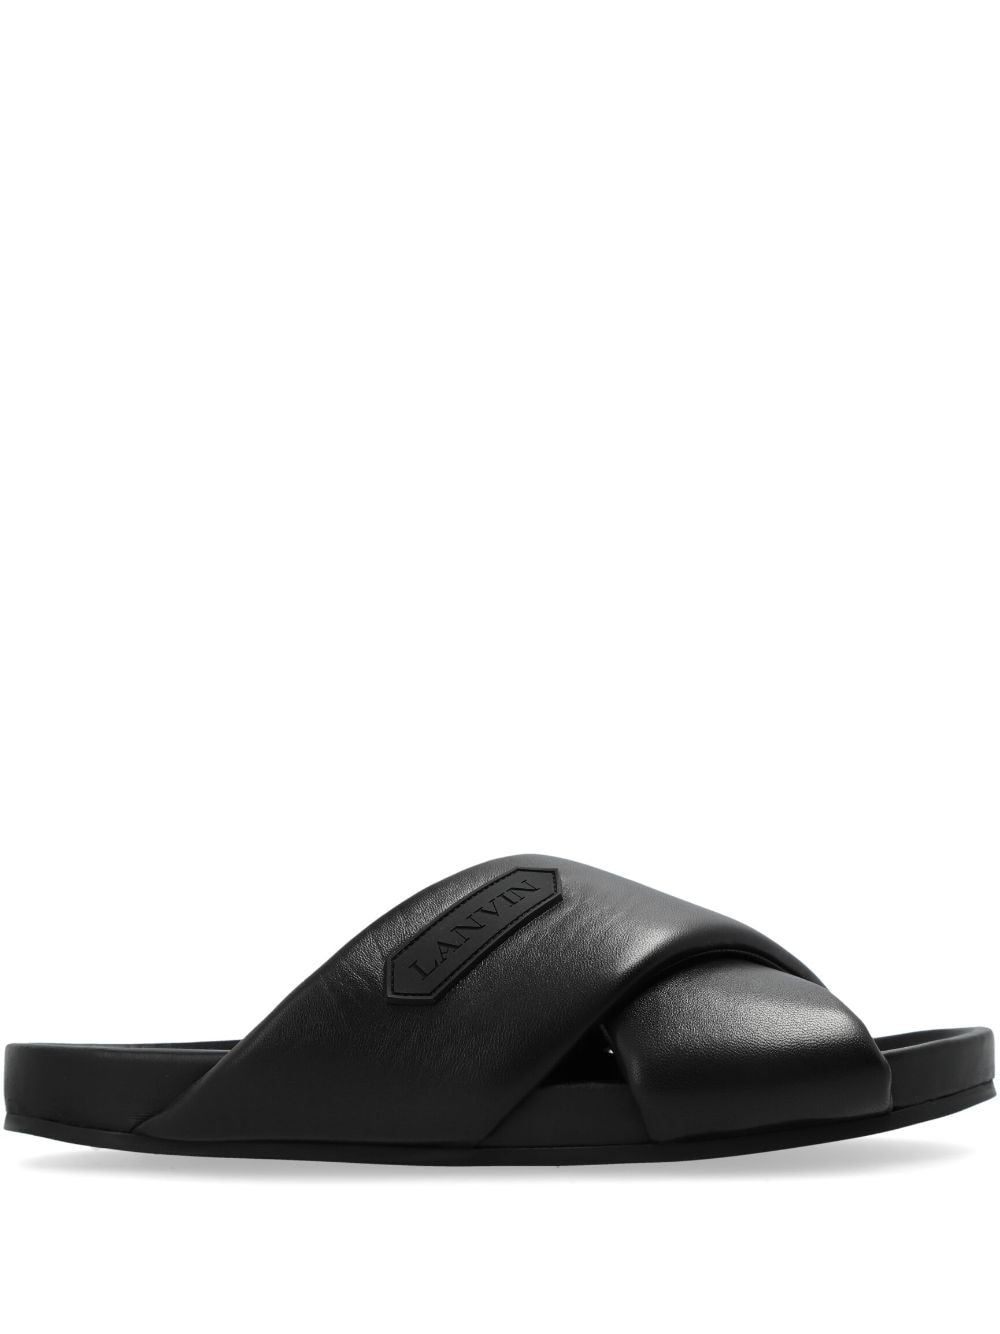 Lanvin Tinkle Leather Sandals In Black